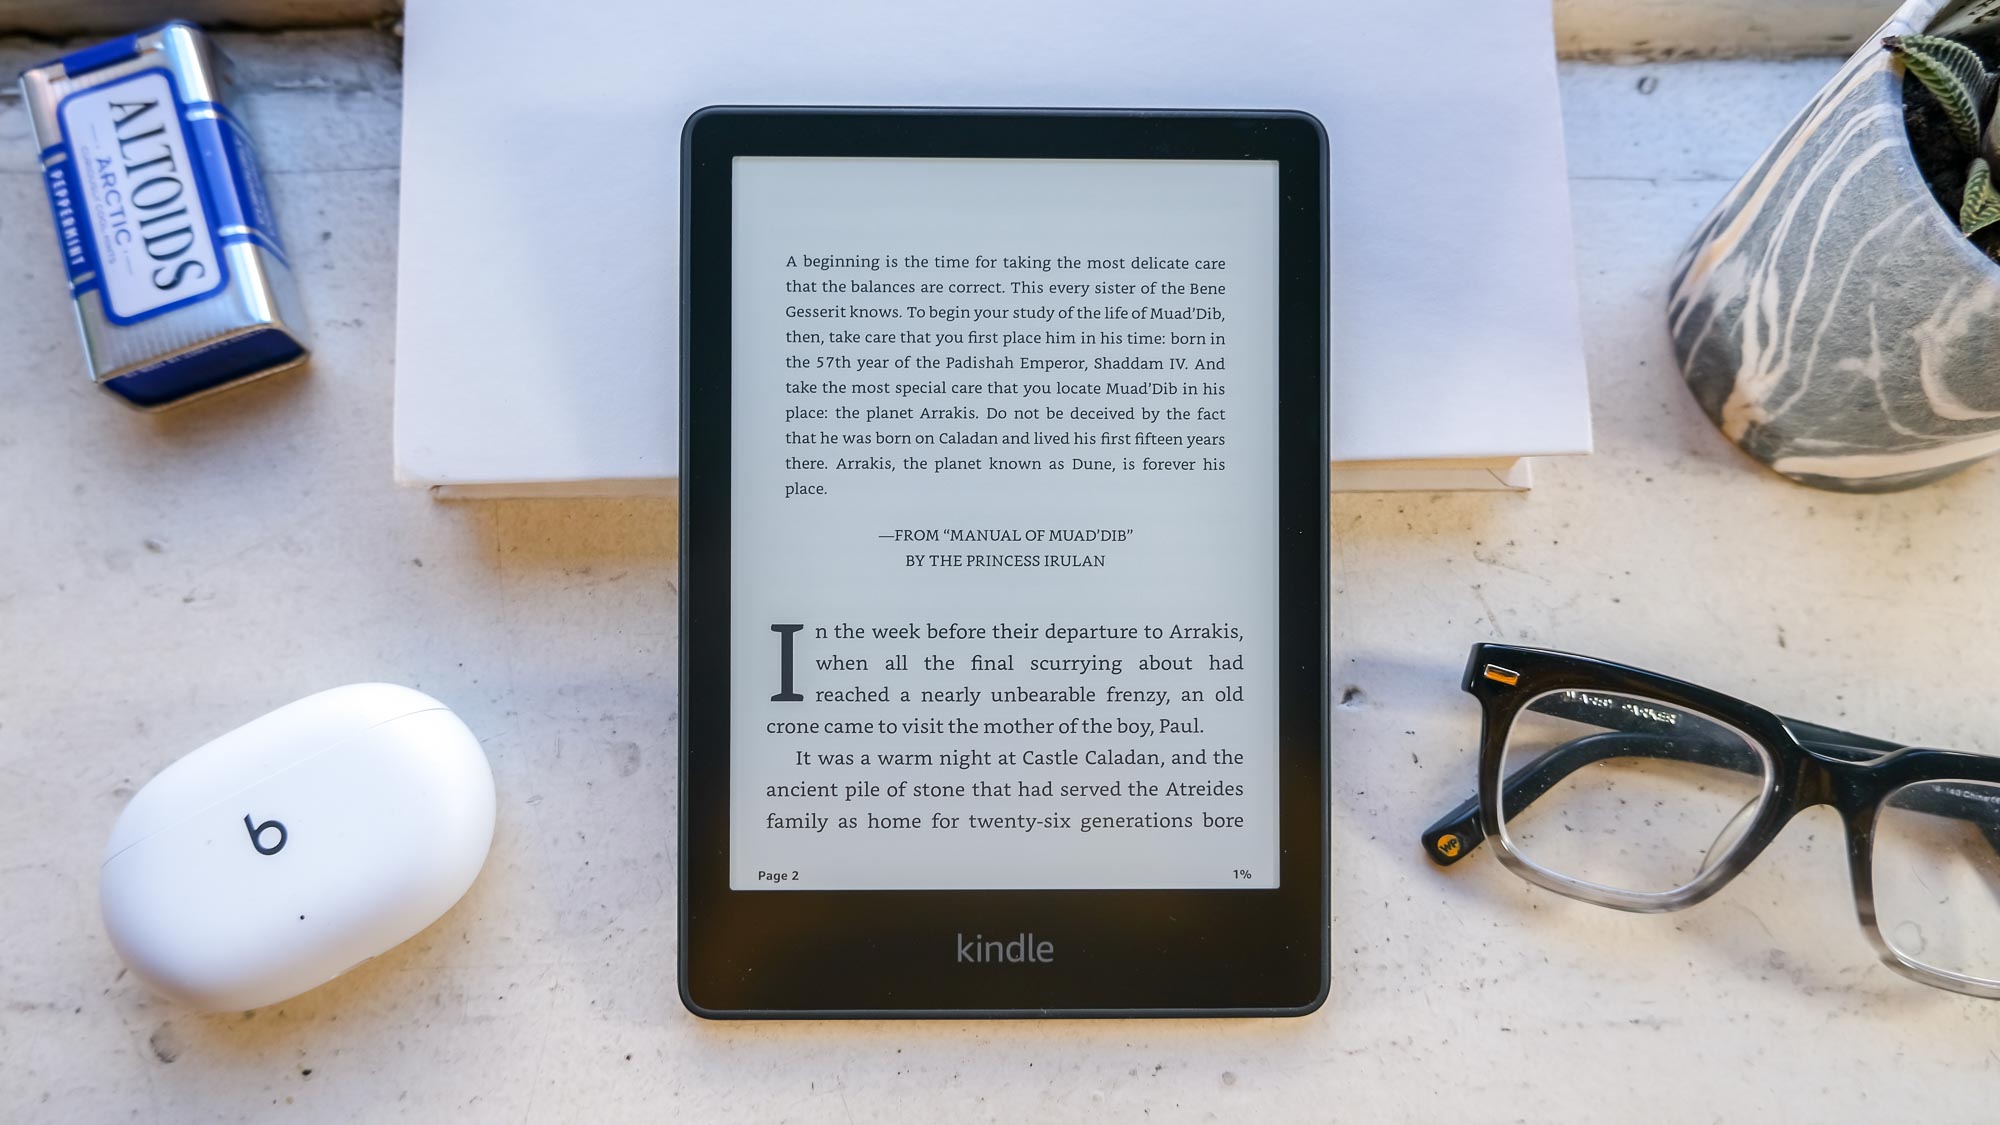 Kindle Paperwhite Signature Edition (32 GB) 6.8 wireless charging 2021  (Black)